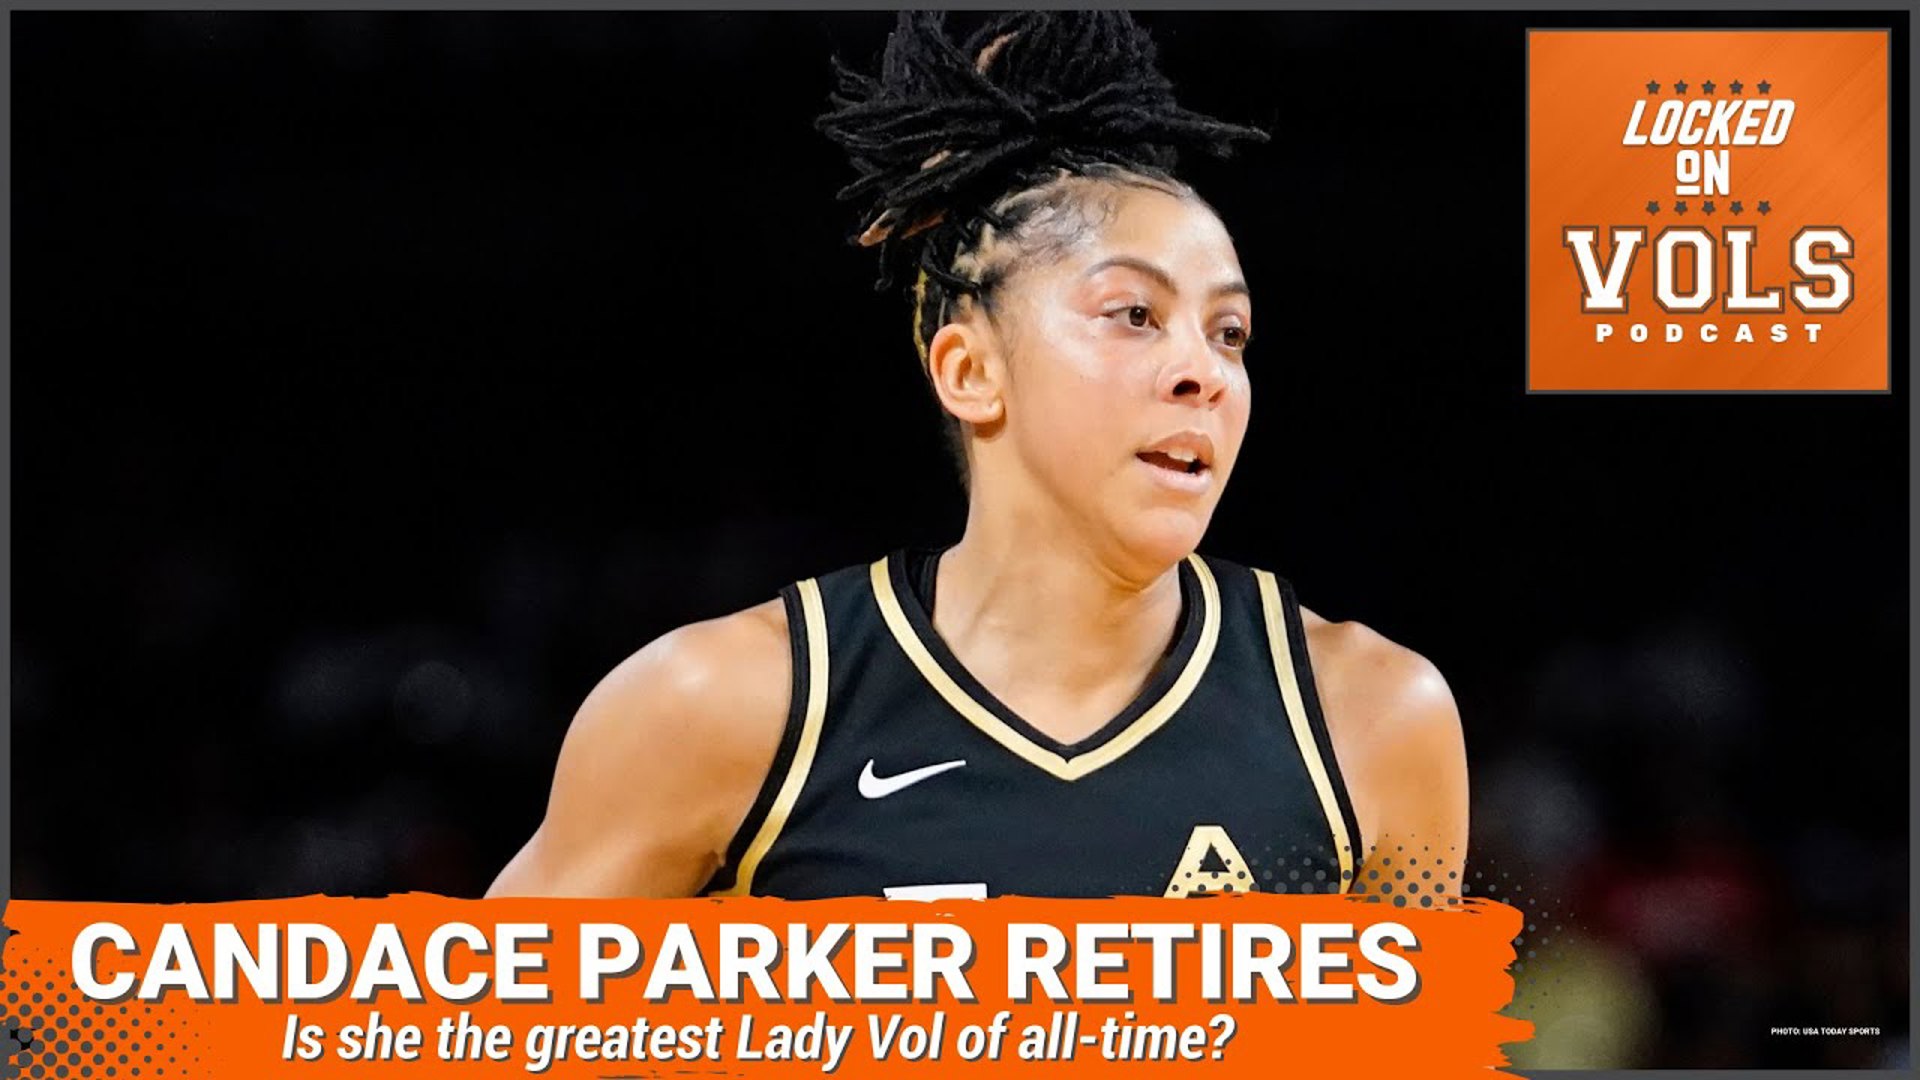 Candace Parker Retires from WNBA. Greatest Lady Vol of All-Time? CFB Revenue Sharing Coming?